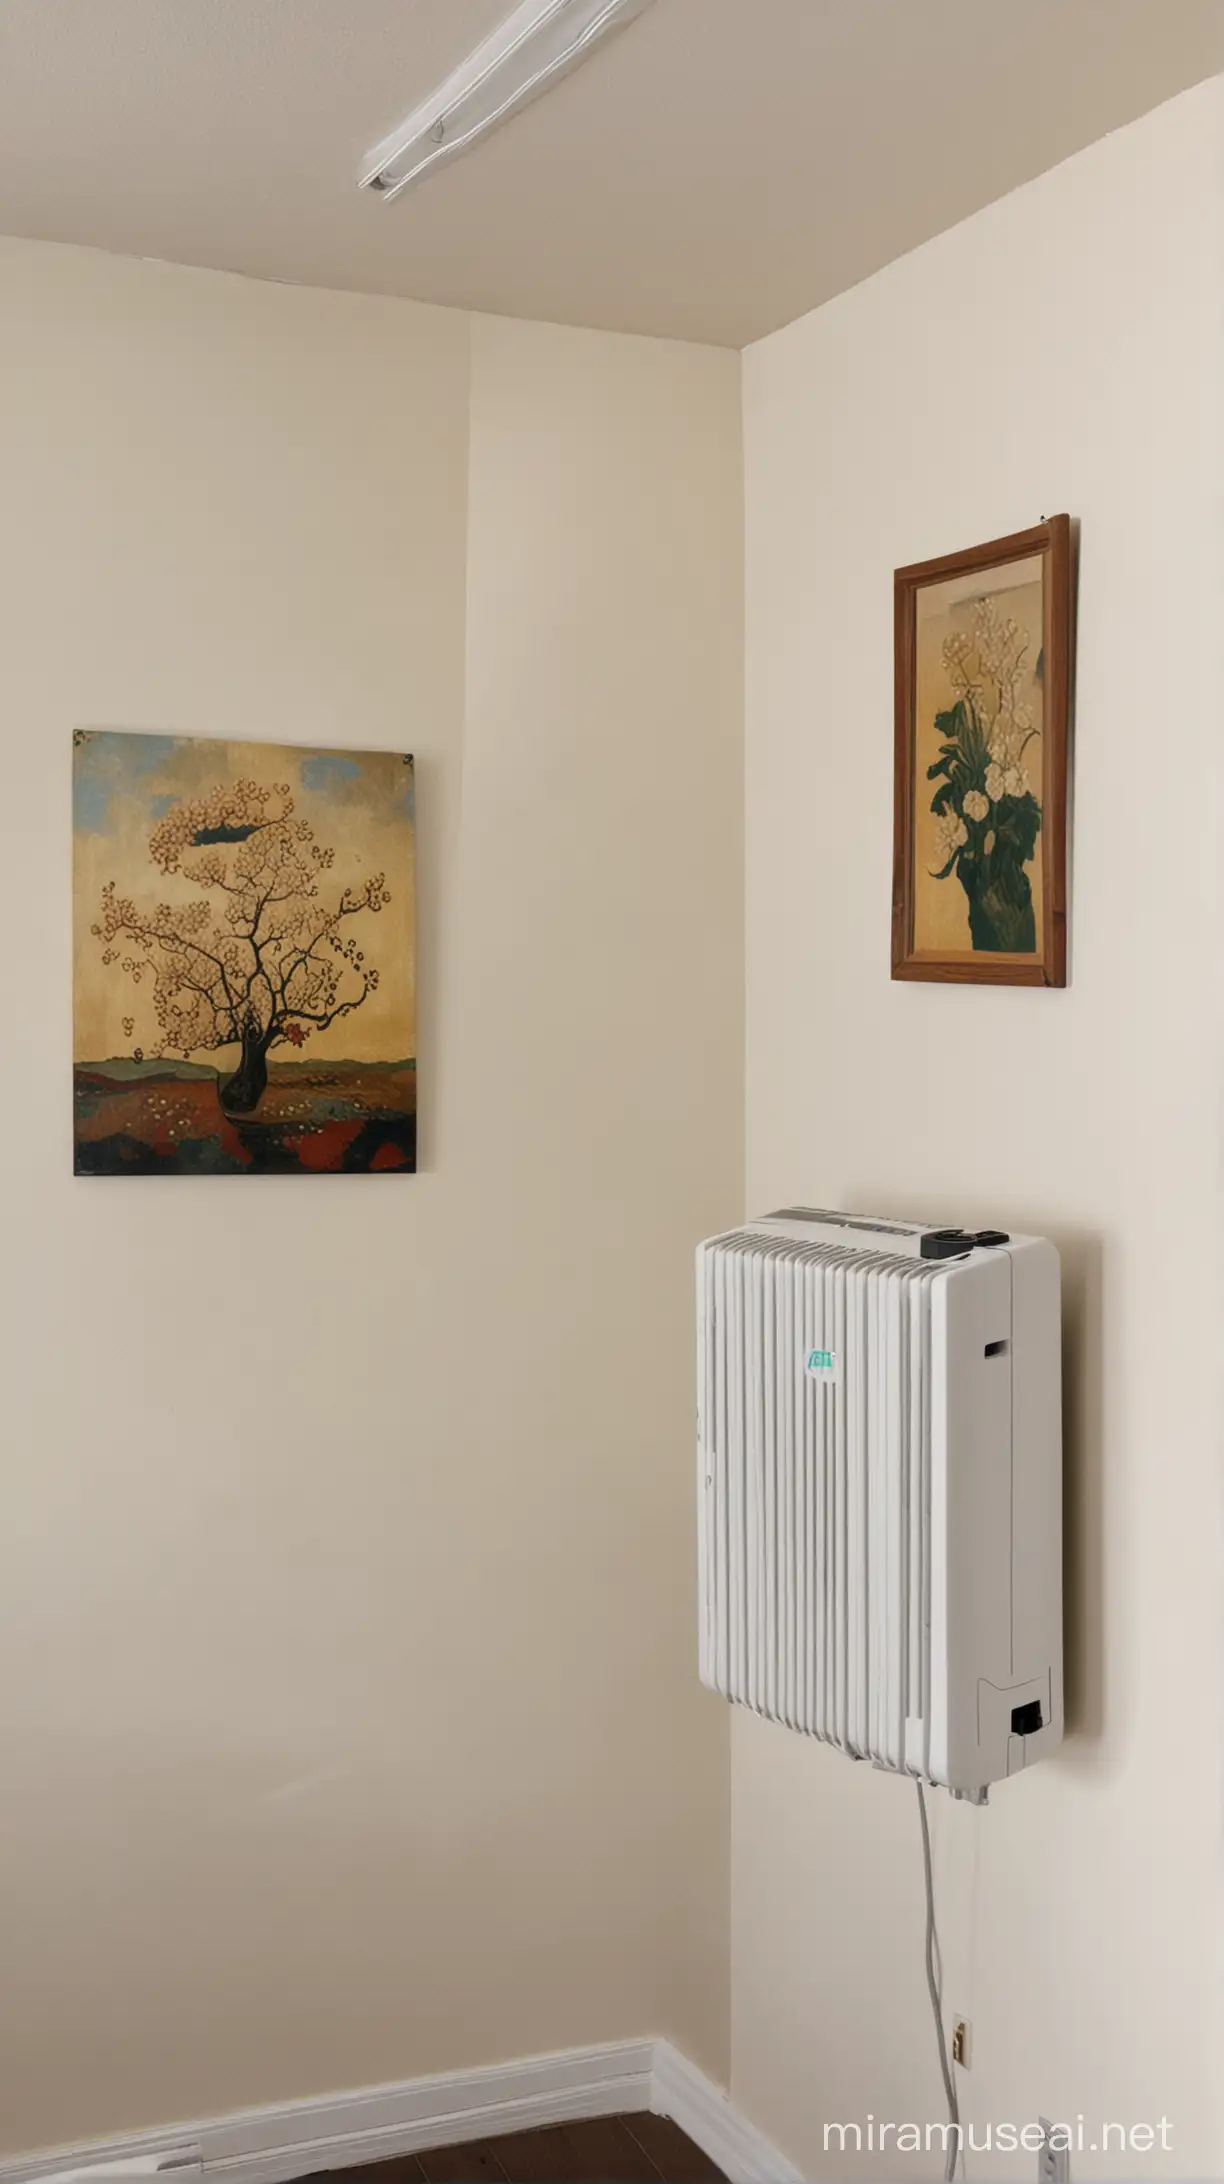 Room with Hanging Dehumidifier and Art Display